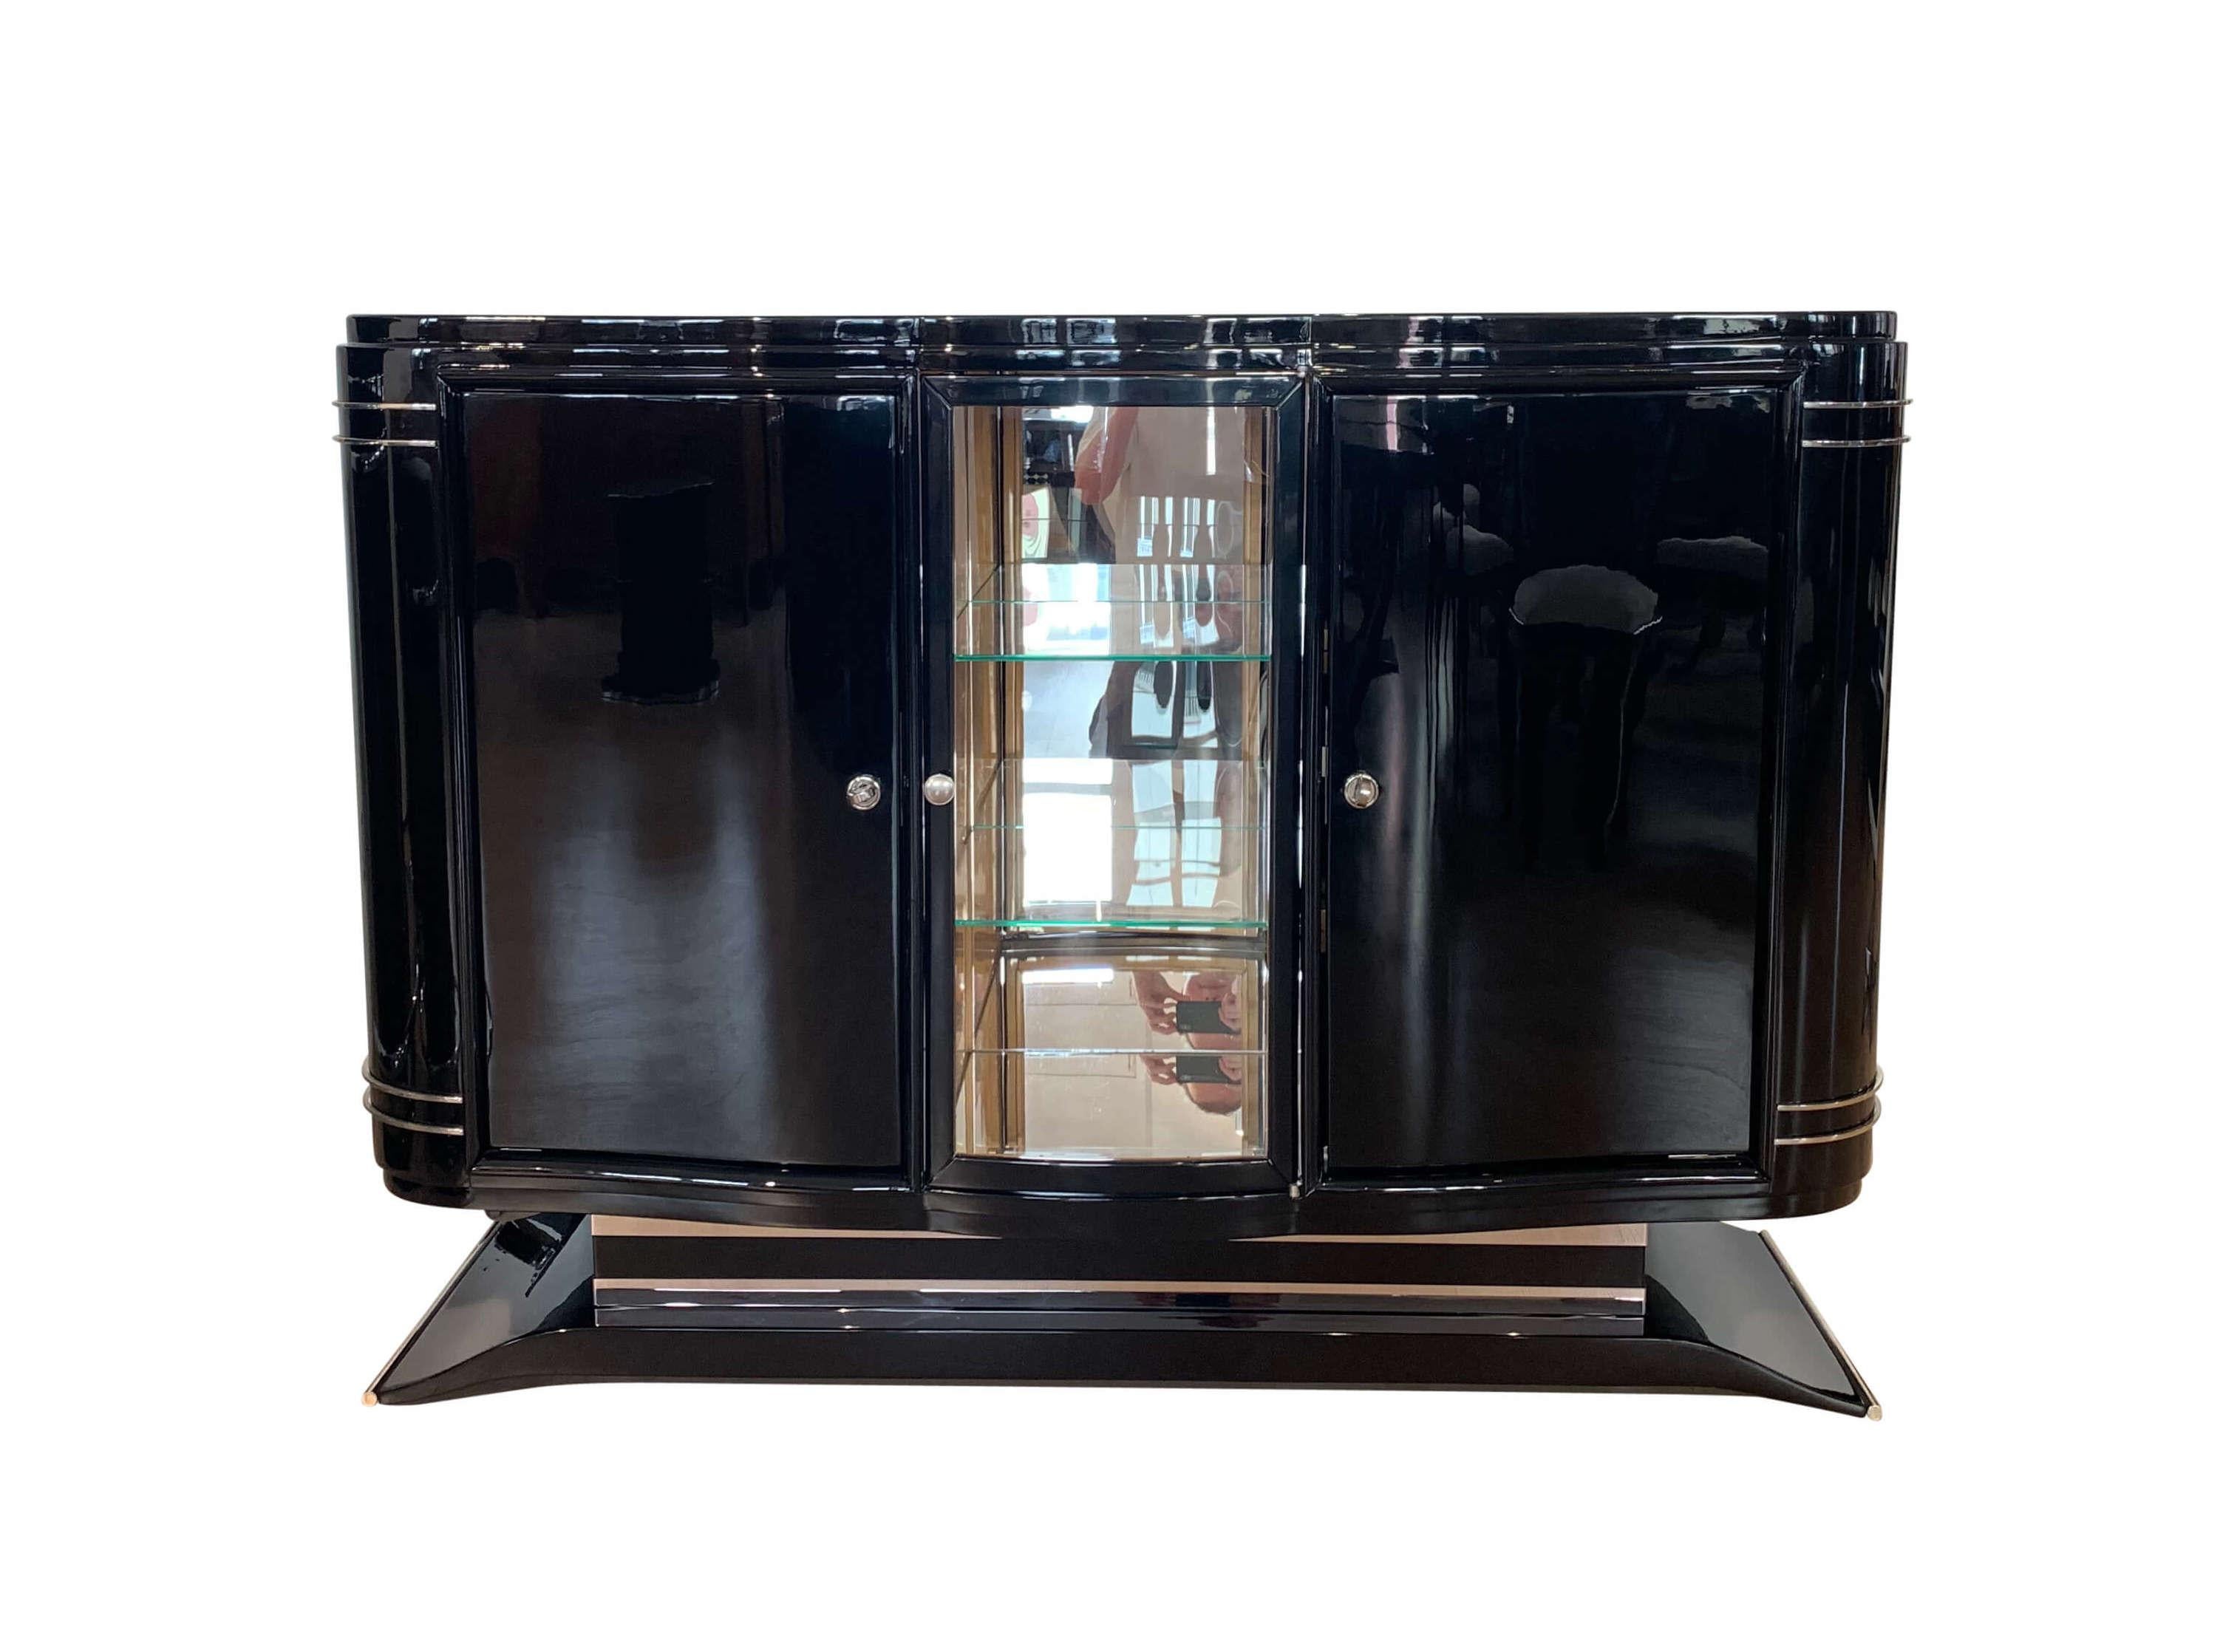 Small Art Deco sideboard / buffet, black lacquer, nickel, France circa 1925

Small black Art Deco sideboard with display cabinet / bar compartment from France circa 1925.
Original heavy metal trim and decorative handles, some of them newly nickel